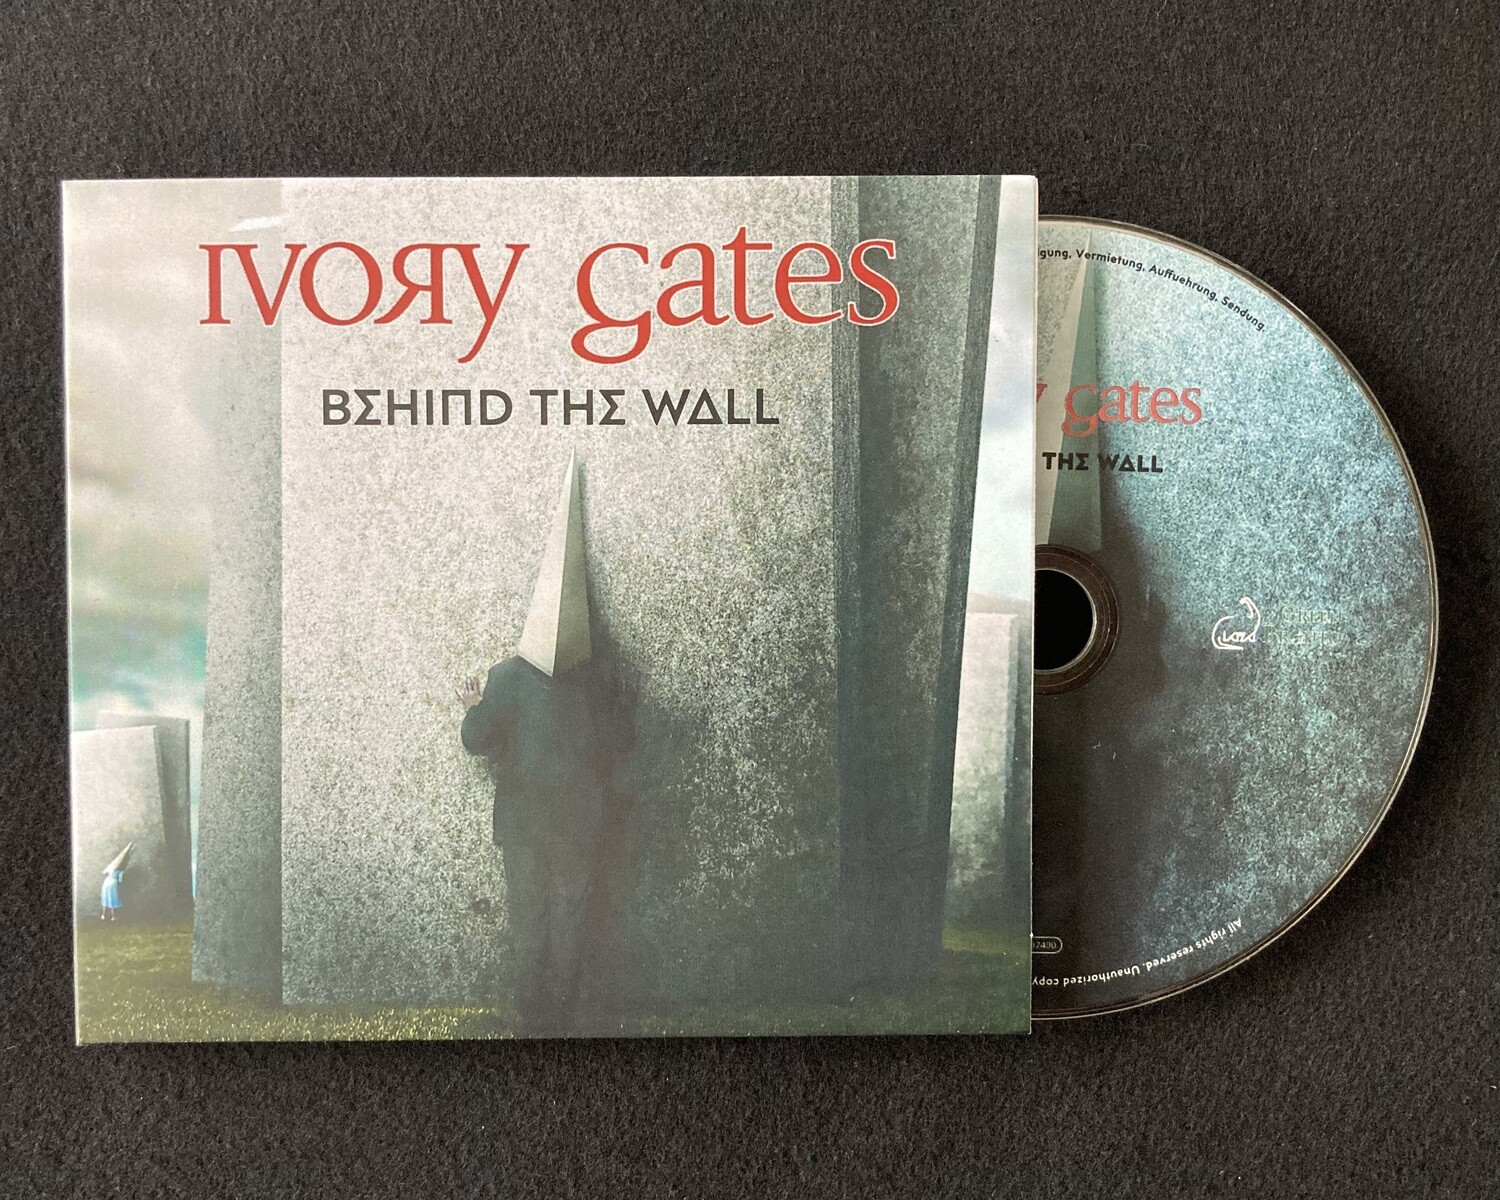 CD+MP3 'Behind the Wall' (Bonus Edition) by Ivory Gates